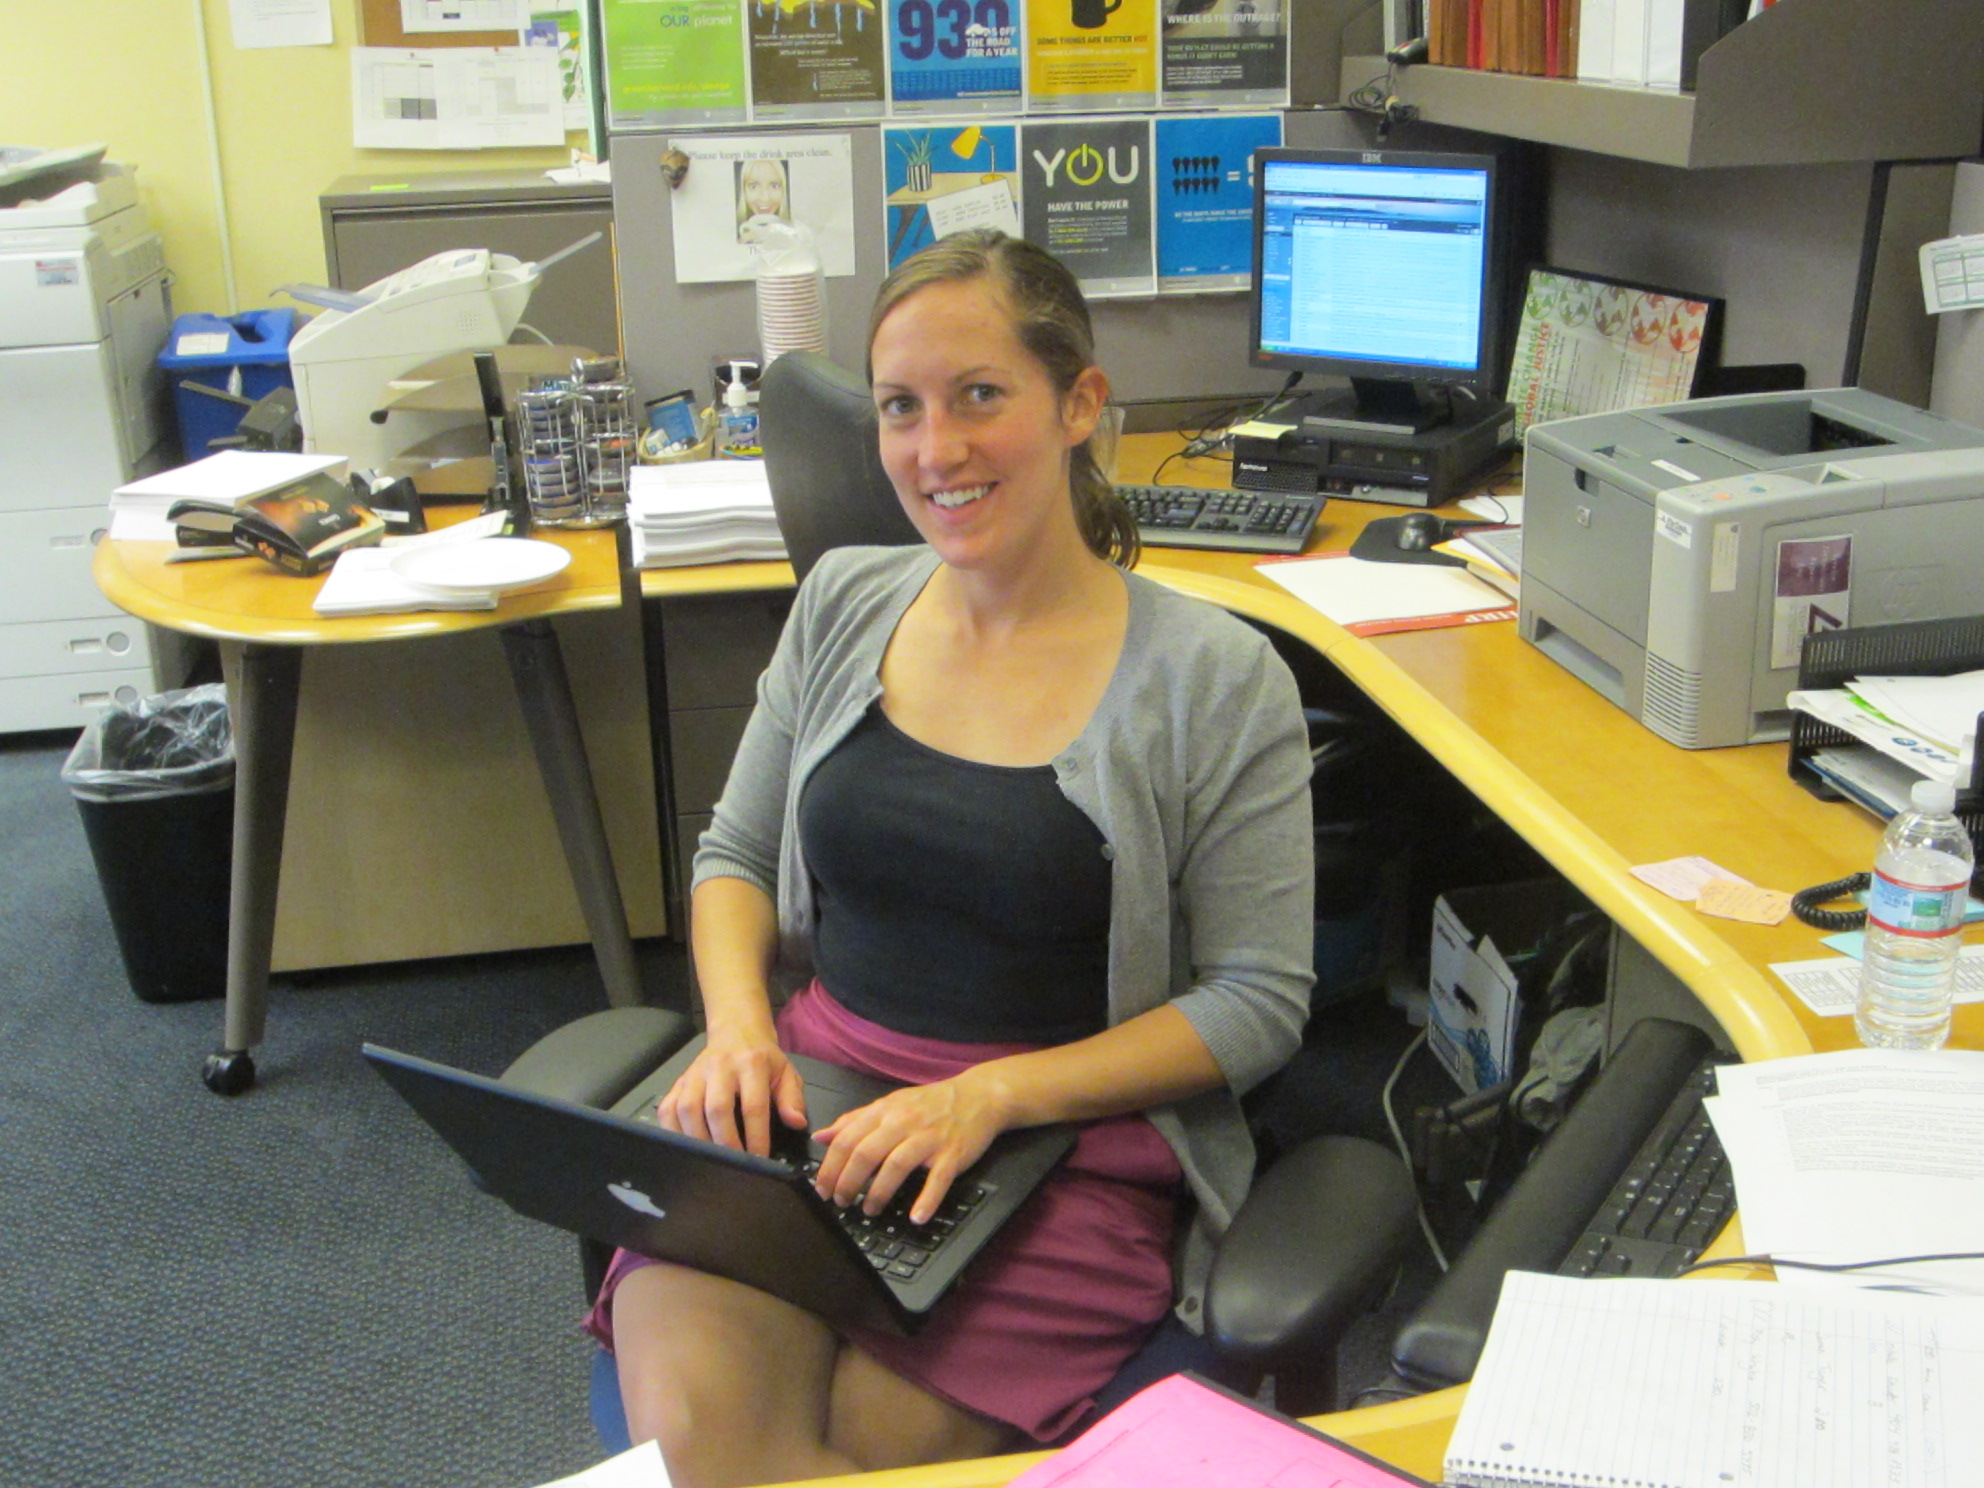 A woman wearing a sweater and a purple skirt sits at a cubicle with a mac laptop on her lap.